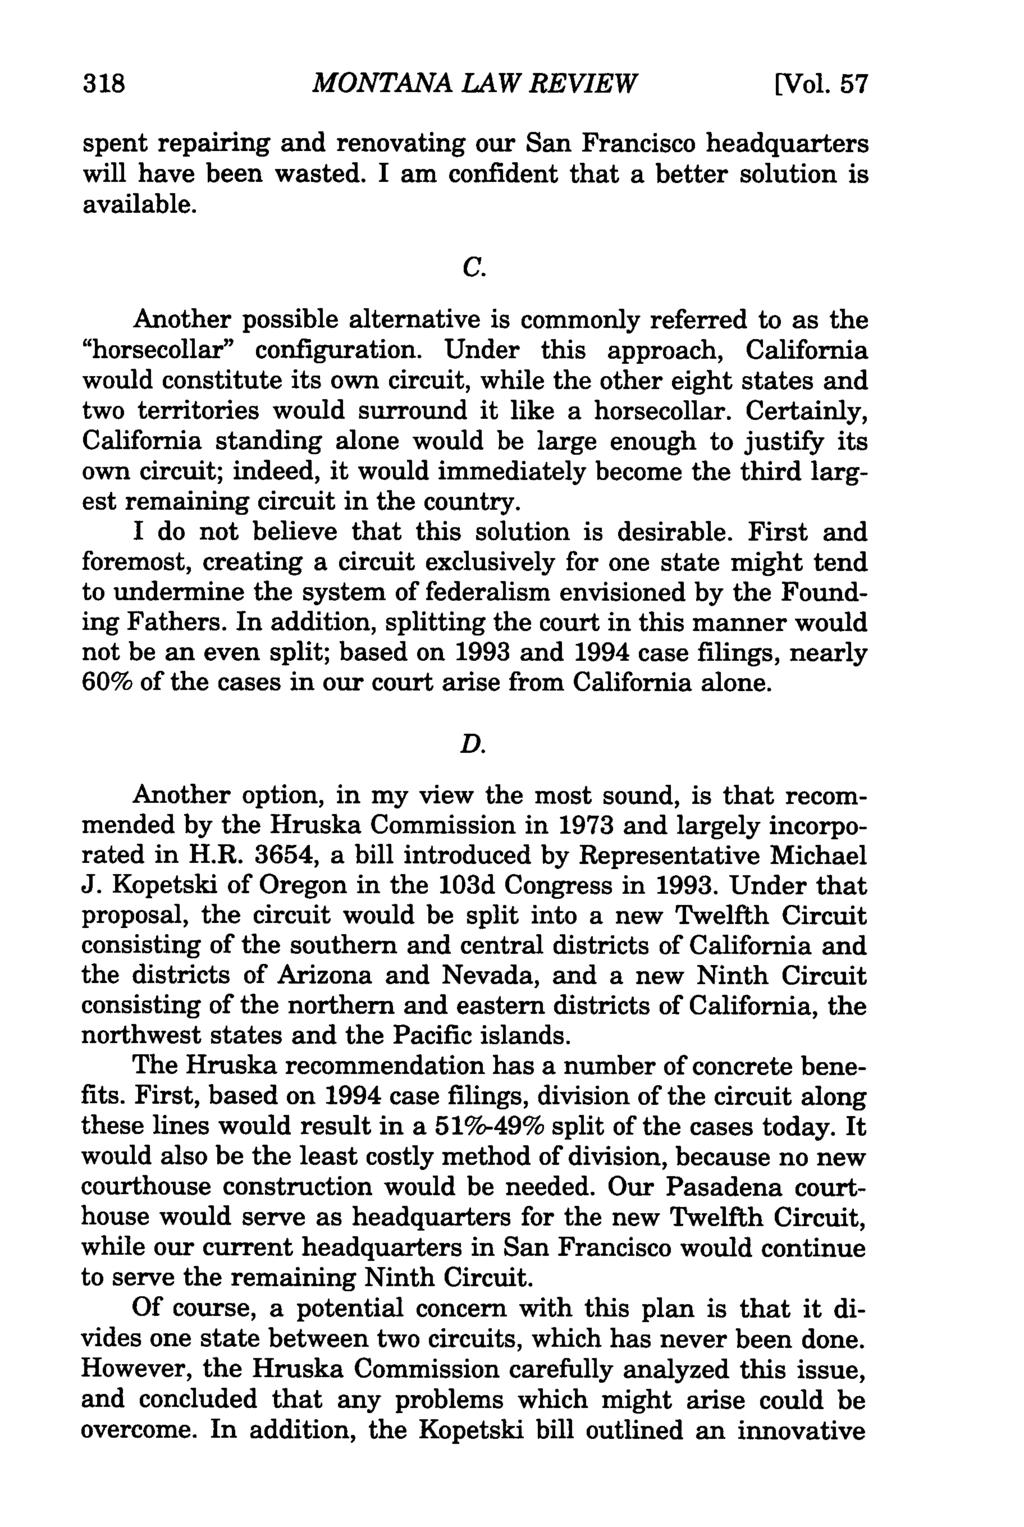 318 Montana Law Review, Vol. 57 [1996], Iss. 2, Art. 5 MONTANA LAW REVIEW [Vol. 57 spent repairing and renovating our San Francisco headquarters will have been wasted.